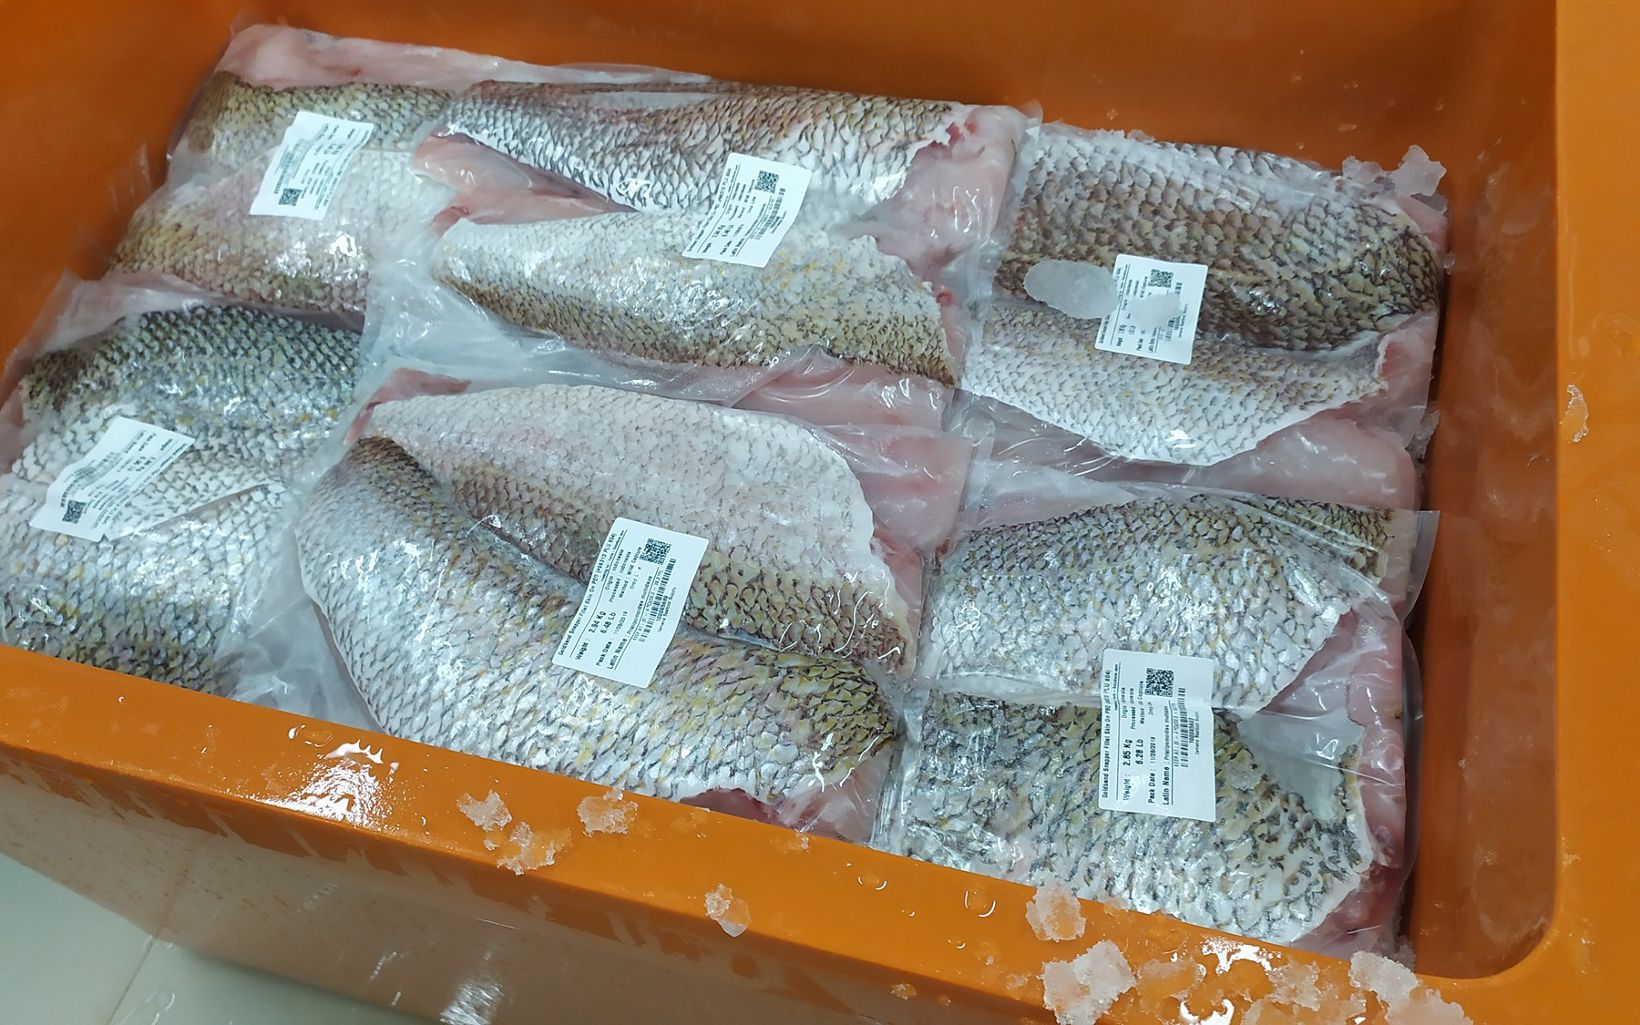 A box full of packaged fish fillets with labels.